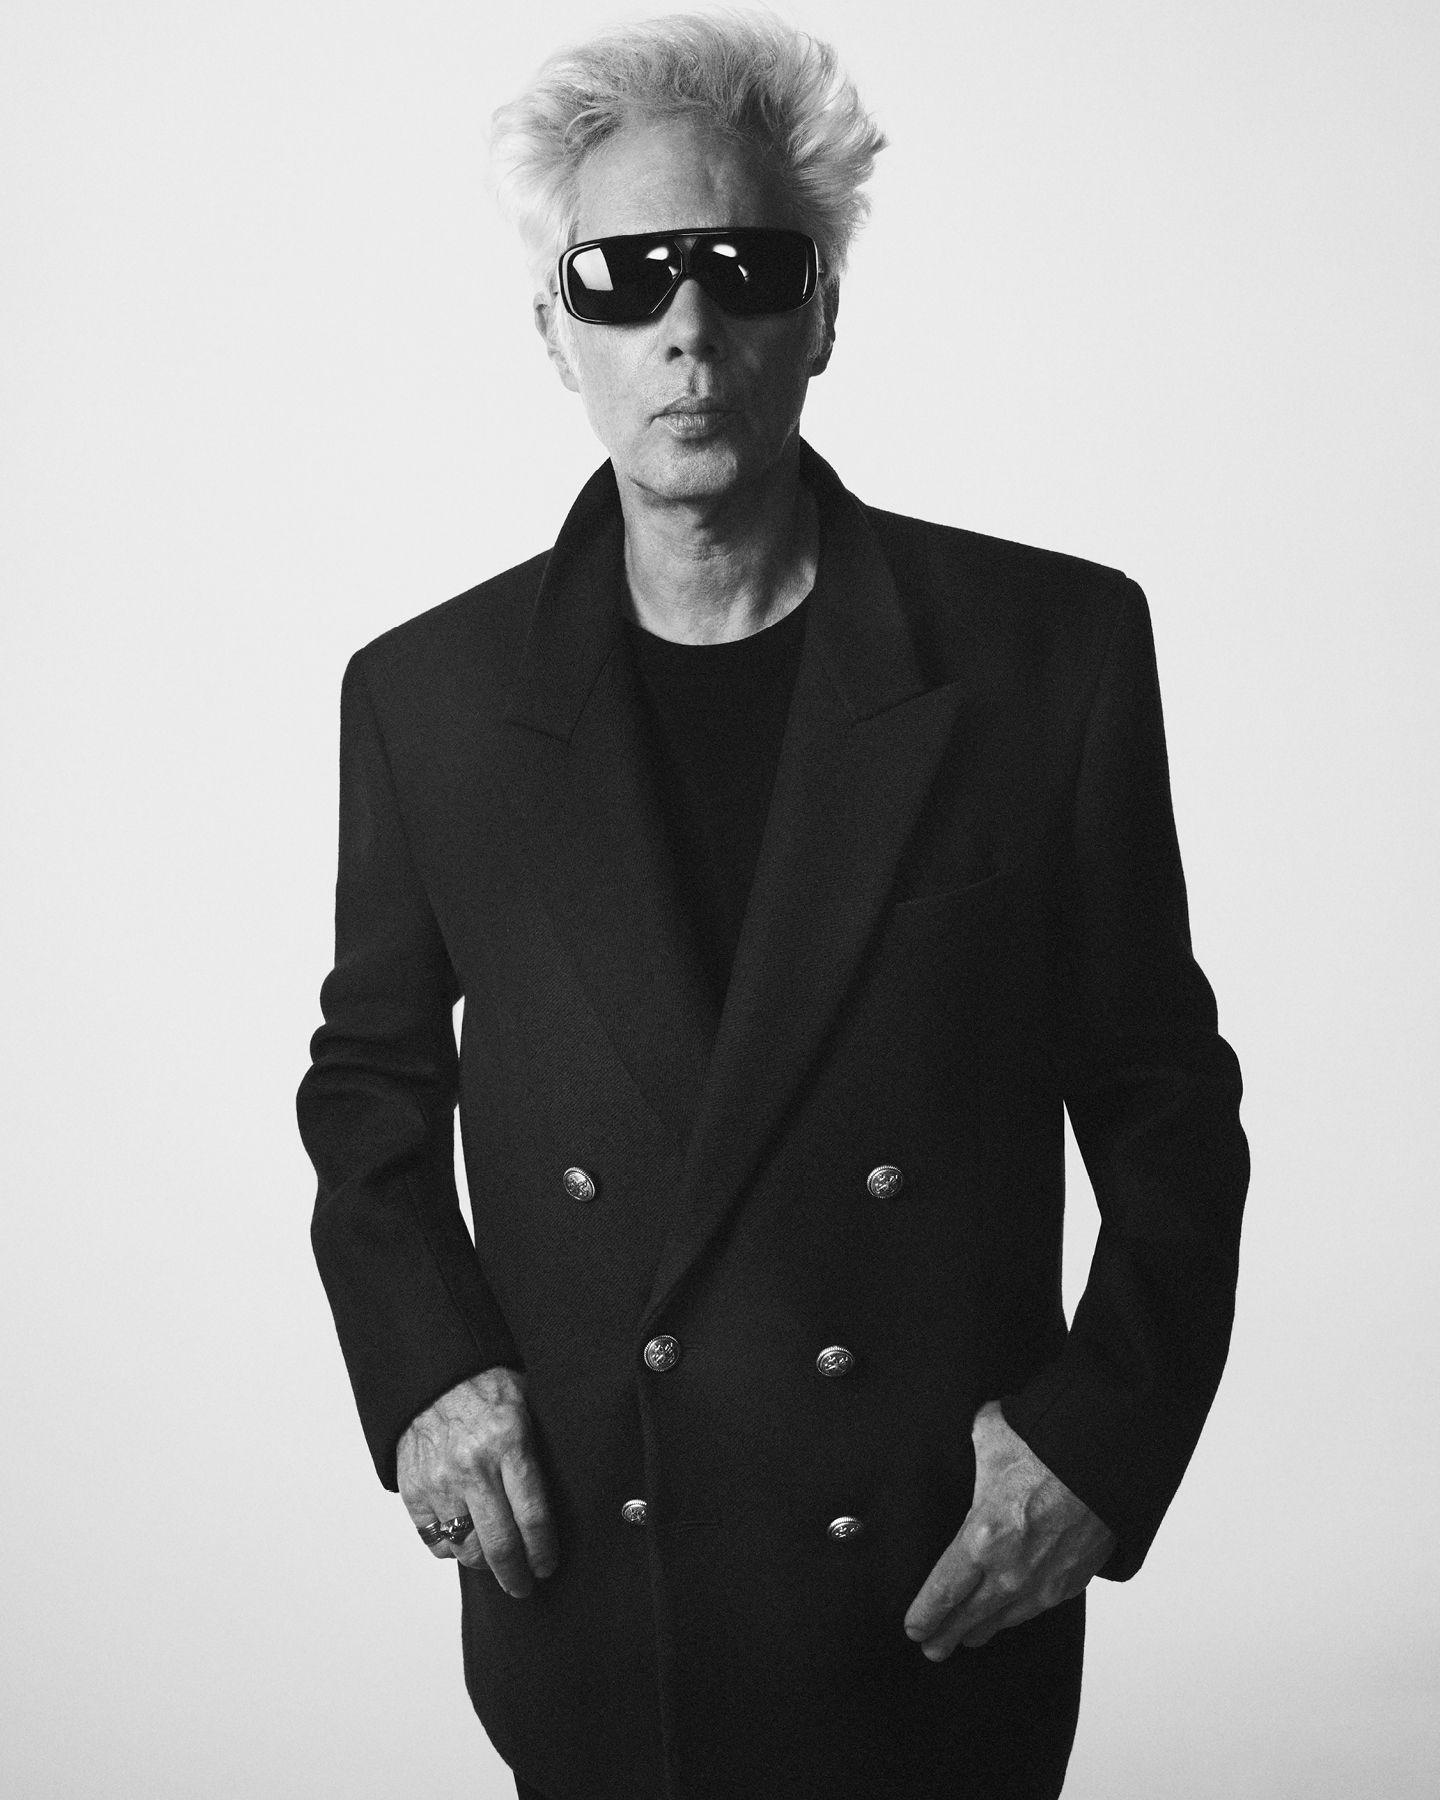 SAINT LAURENT - The Director’s Cut⁣by Anthony Vaccarello⁣Jim Jarmusch⁣Photographed by David Sims⁣⁣#Y